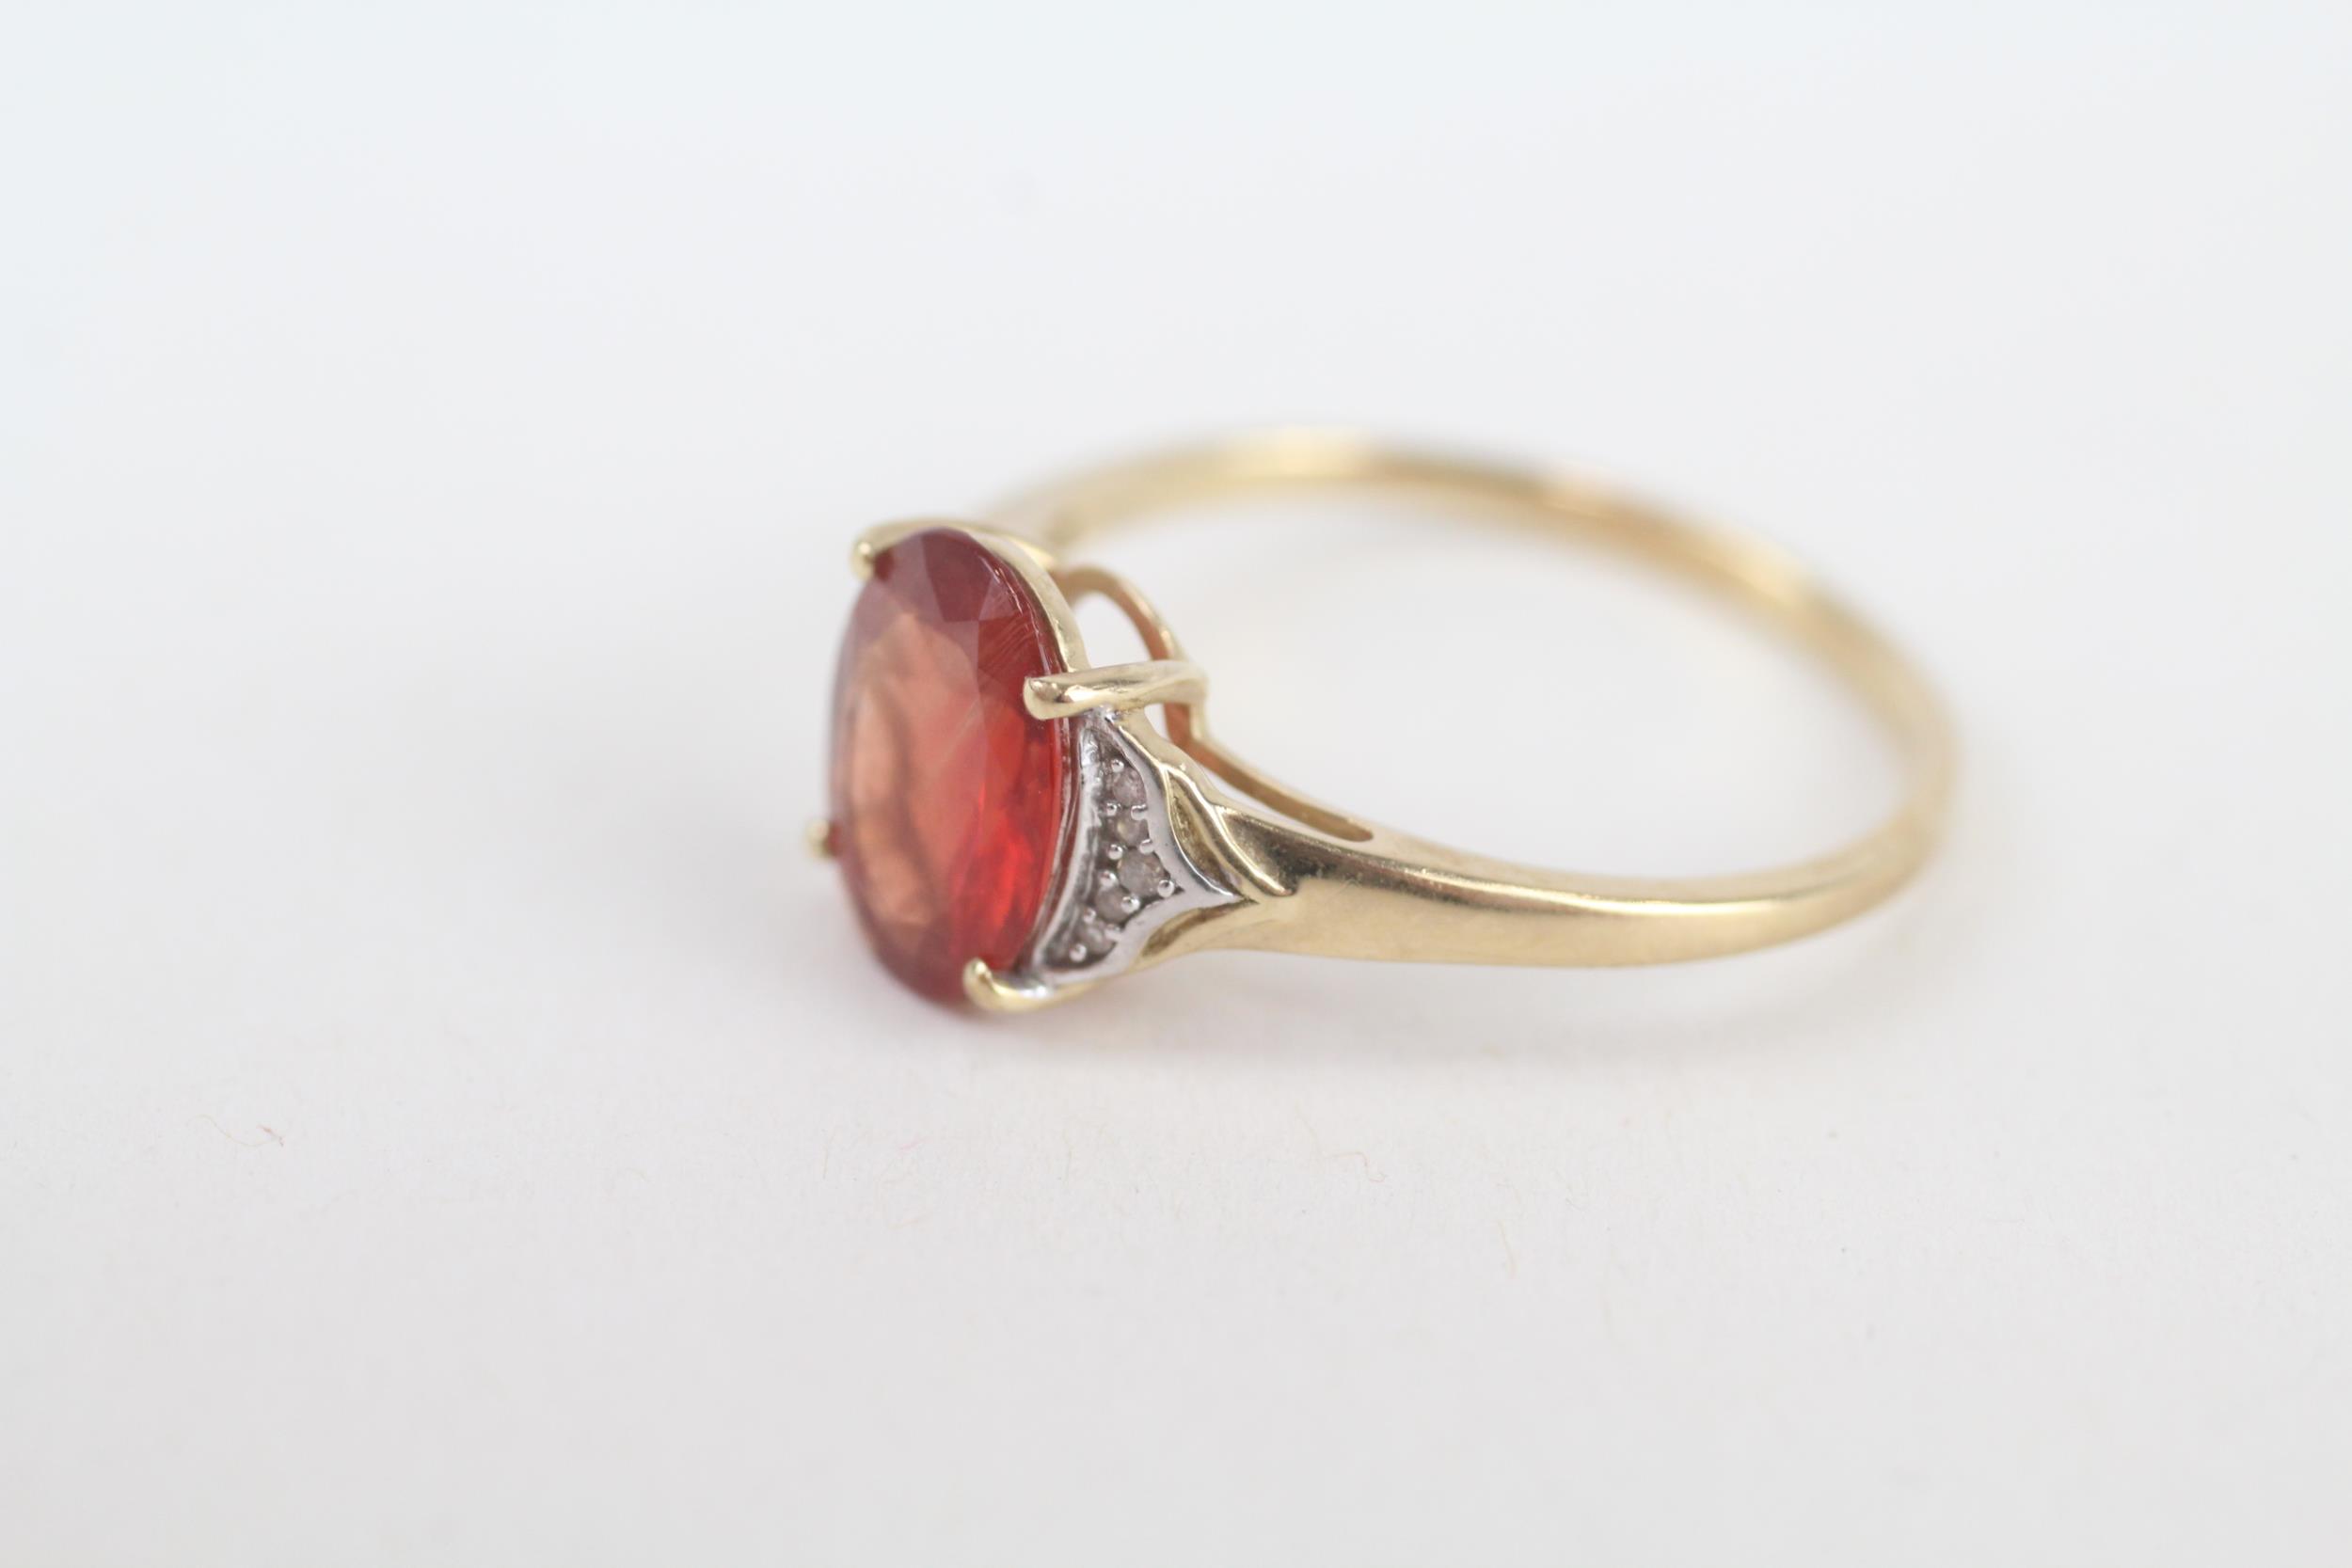 9ct gold red gemstone single stone ring with diamond sides Size R 1/2 2.1 g - Image 4 of 5